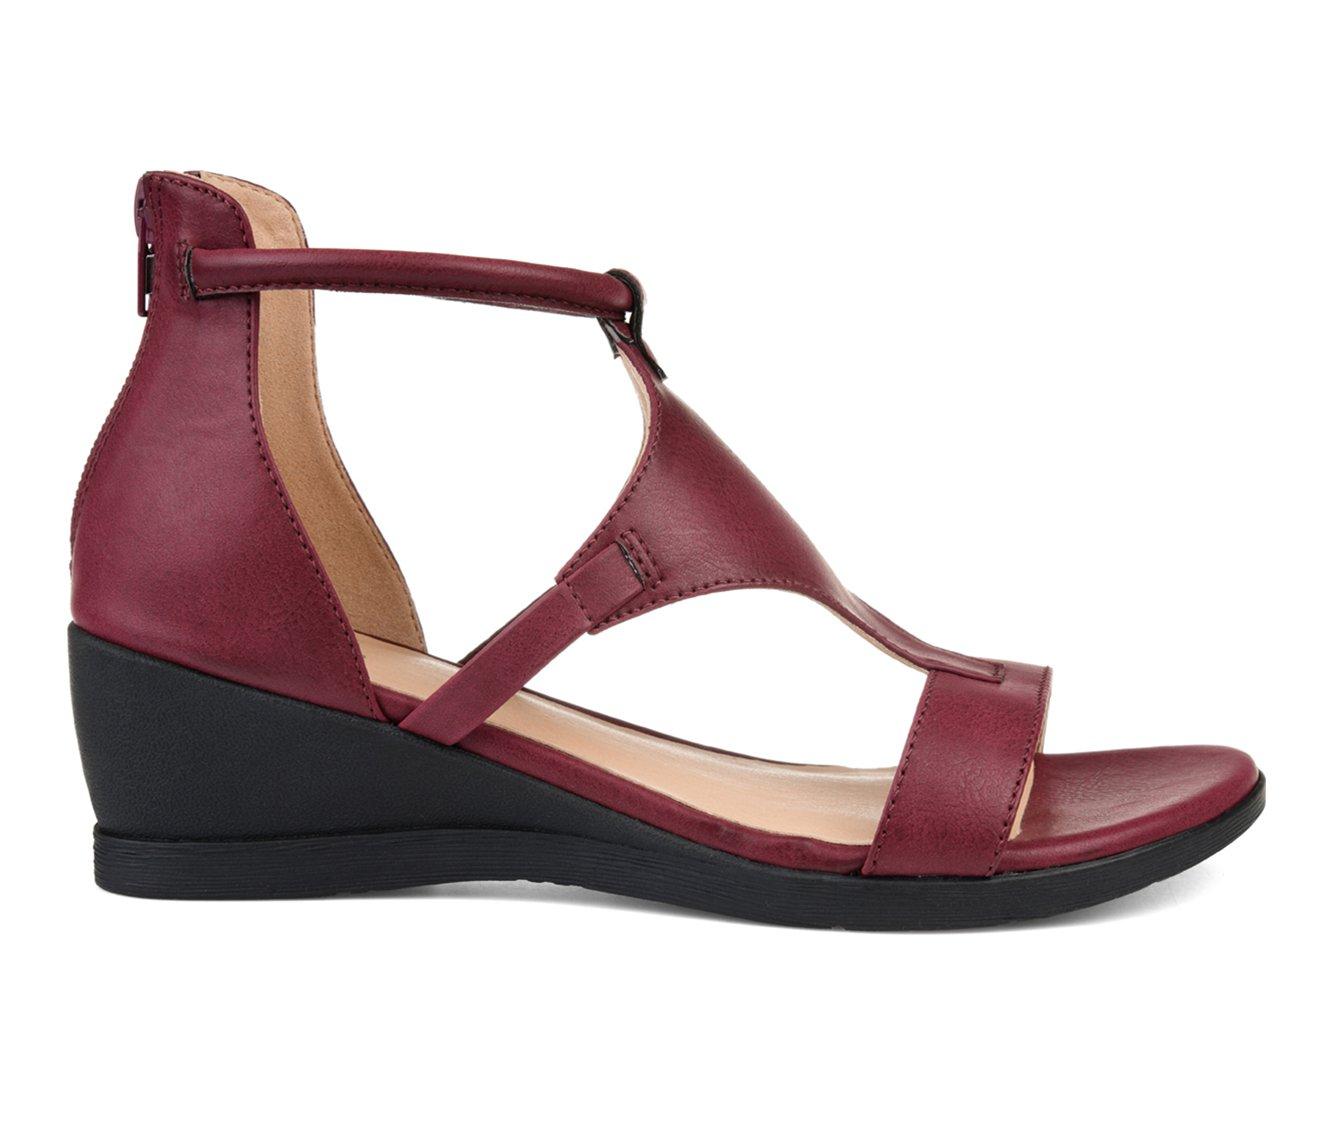 Women's Journee Collection Trayle Wedges